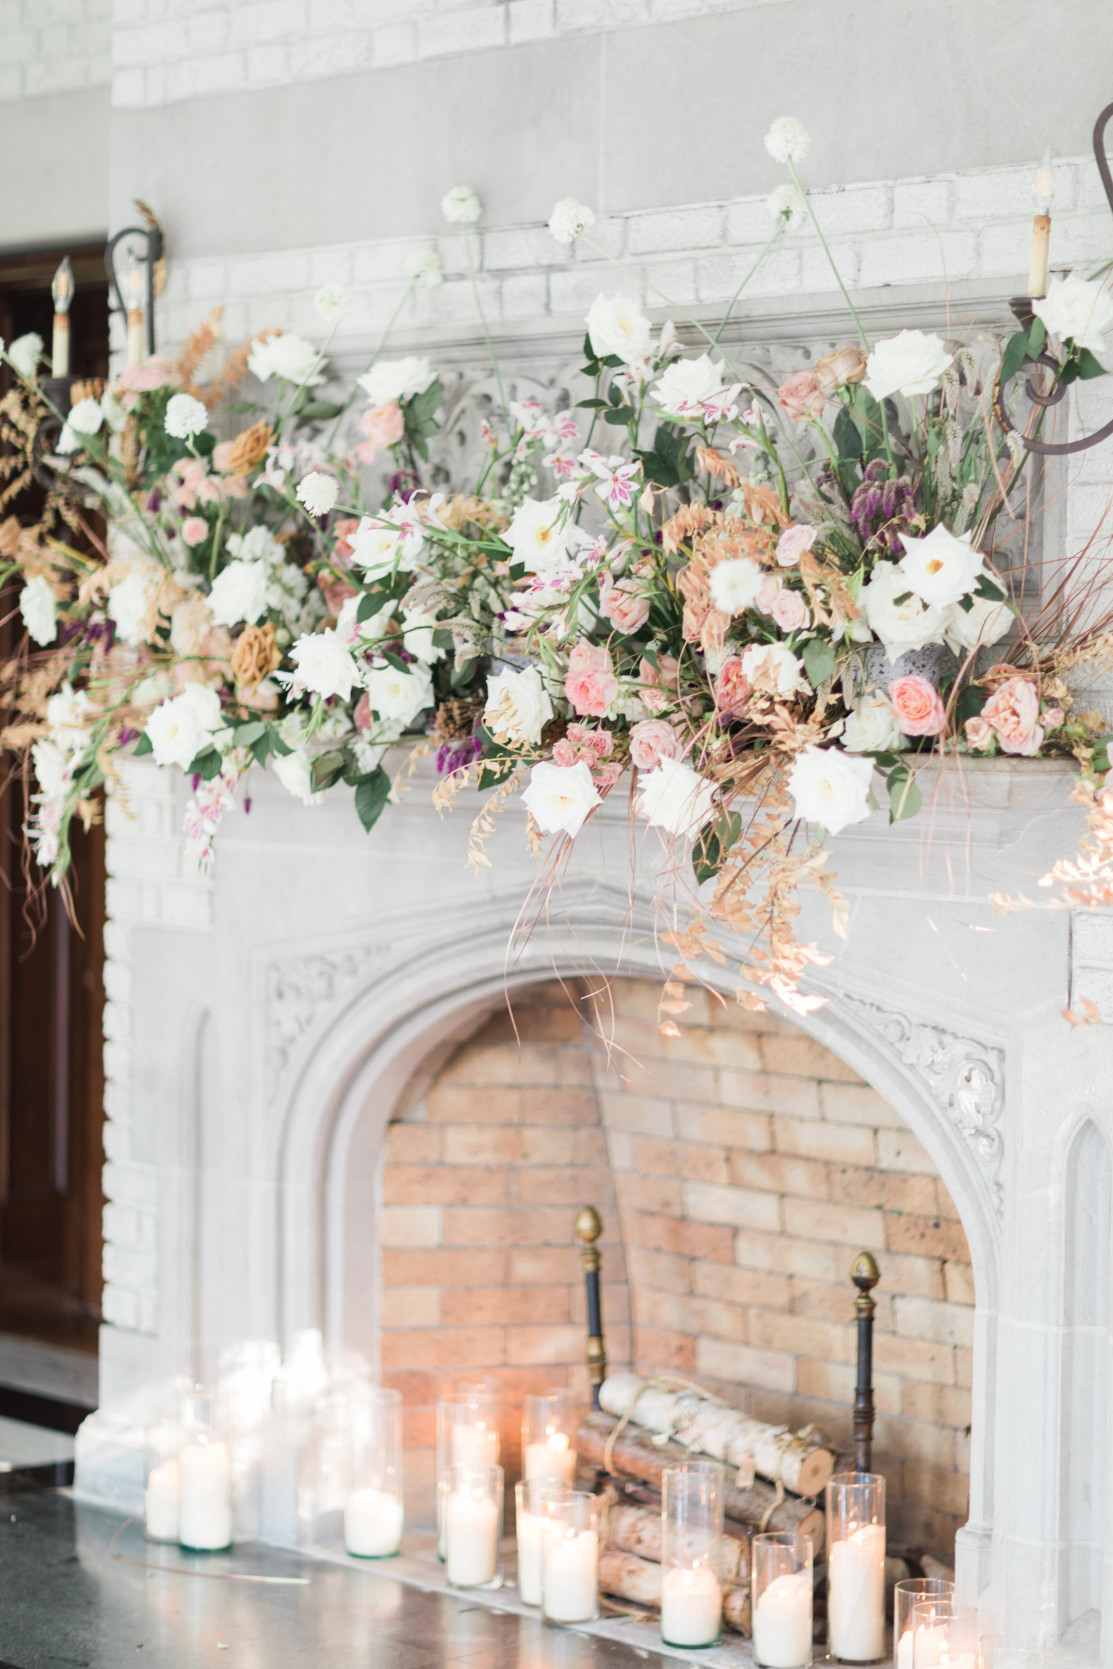 Mantel florals created by Isibeal Studio. Created for a beautiful micro wedding in a historic venue. Decadent yet delicate style.